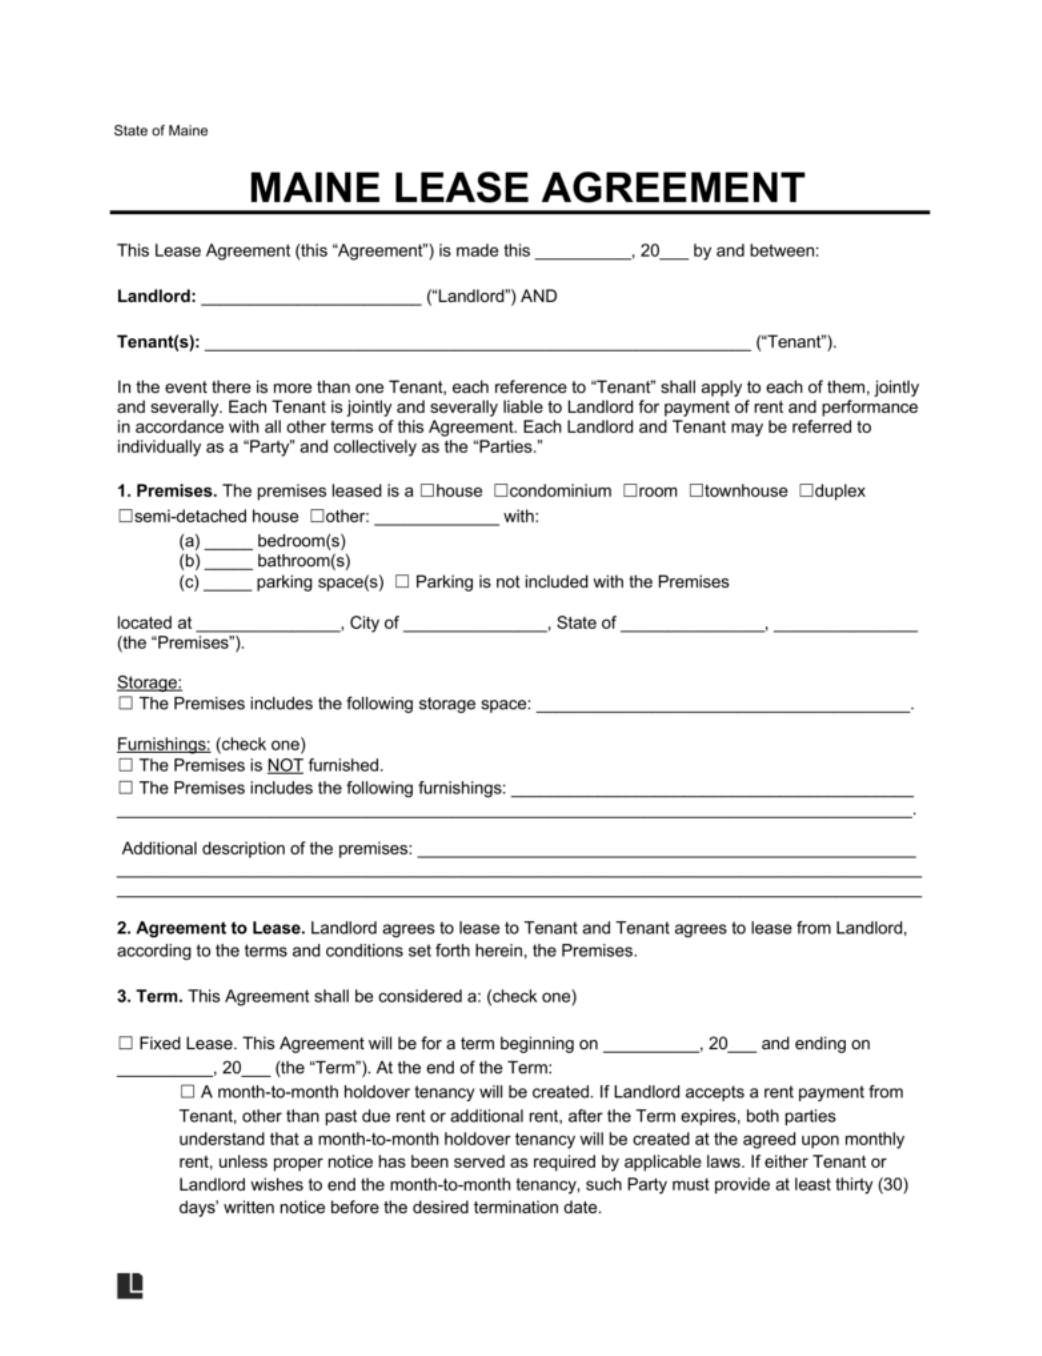 LegalTemplates Maine Residential Lease Agreement 